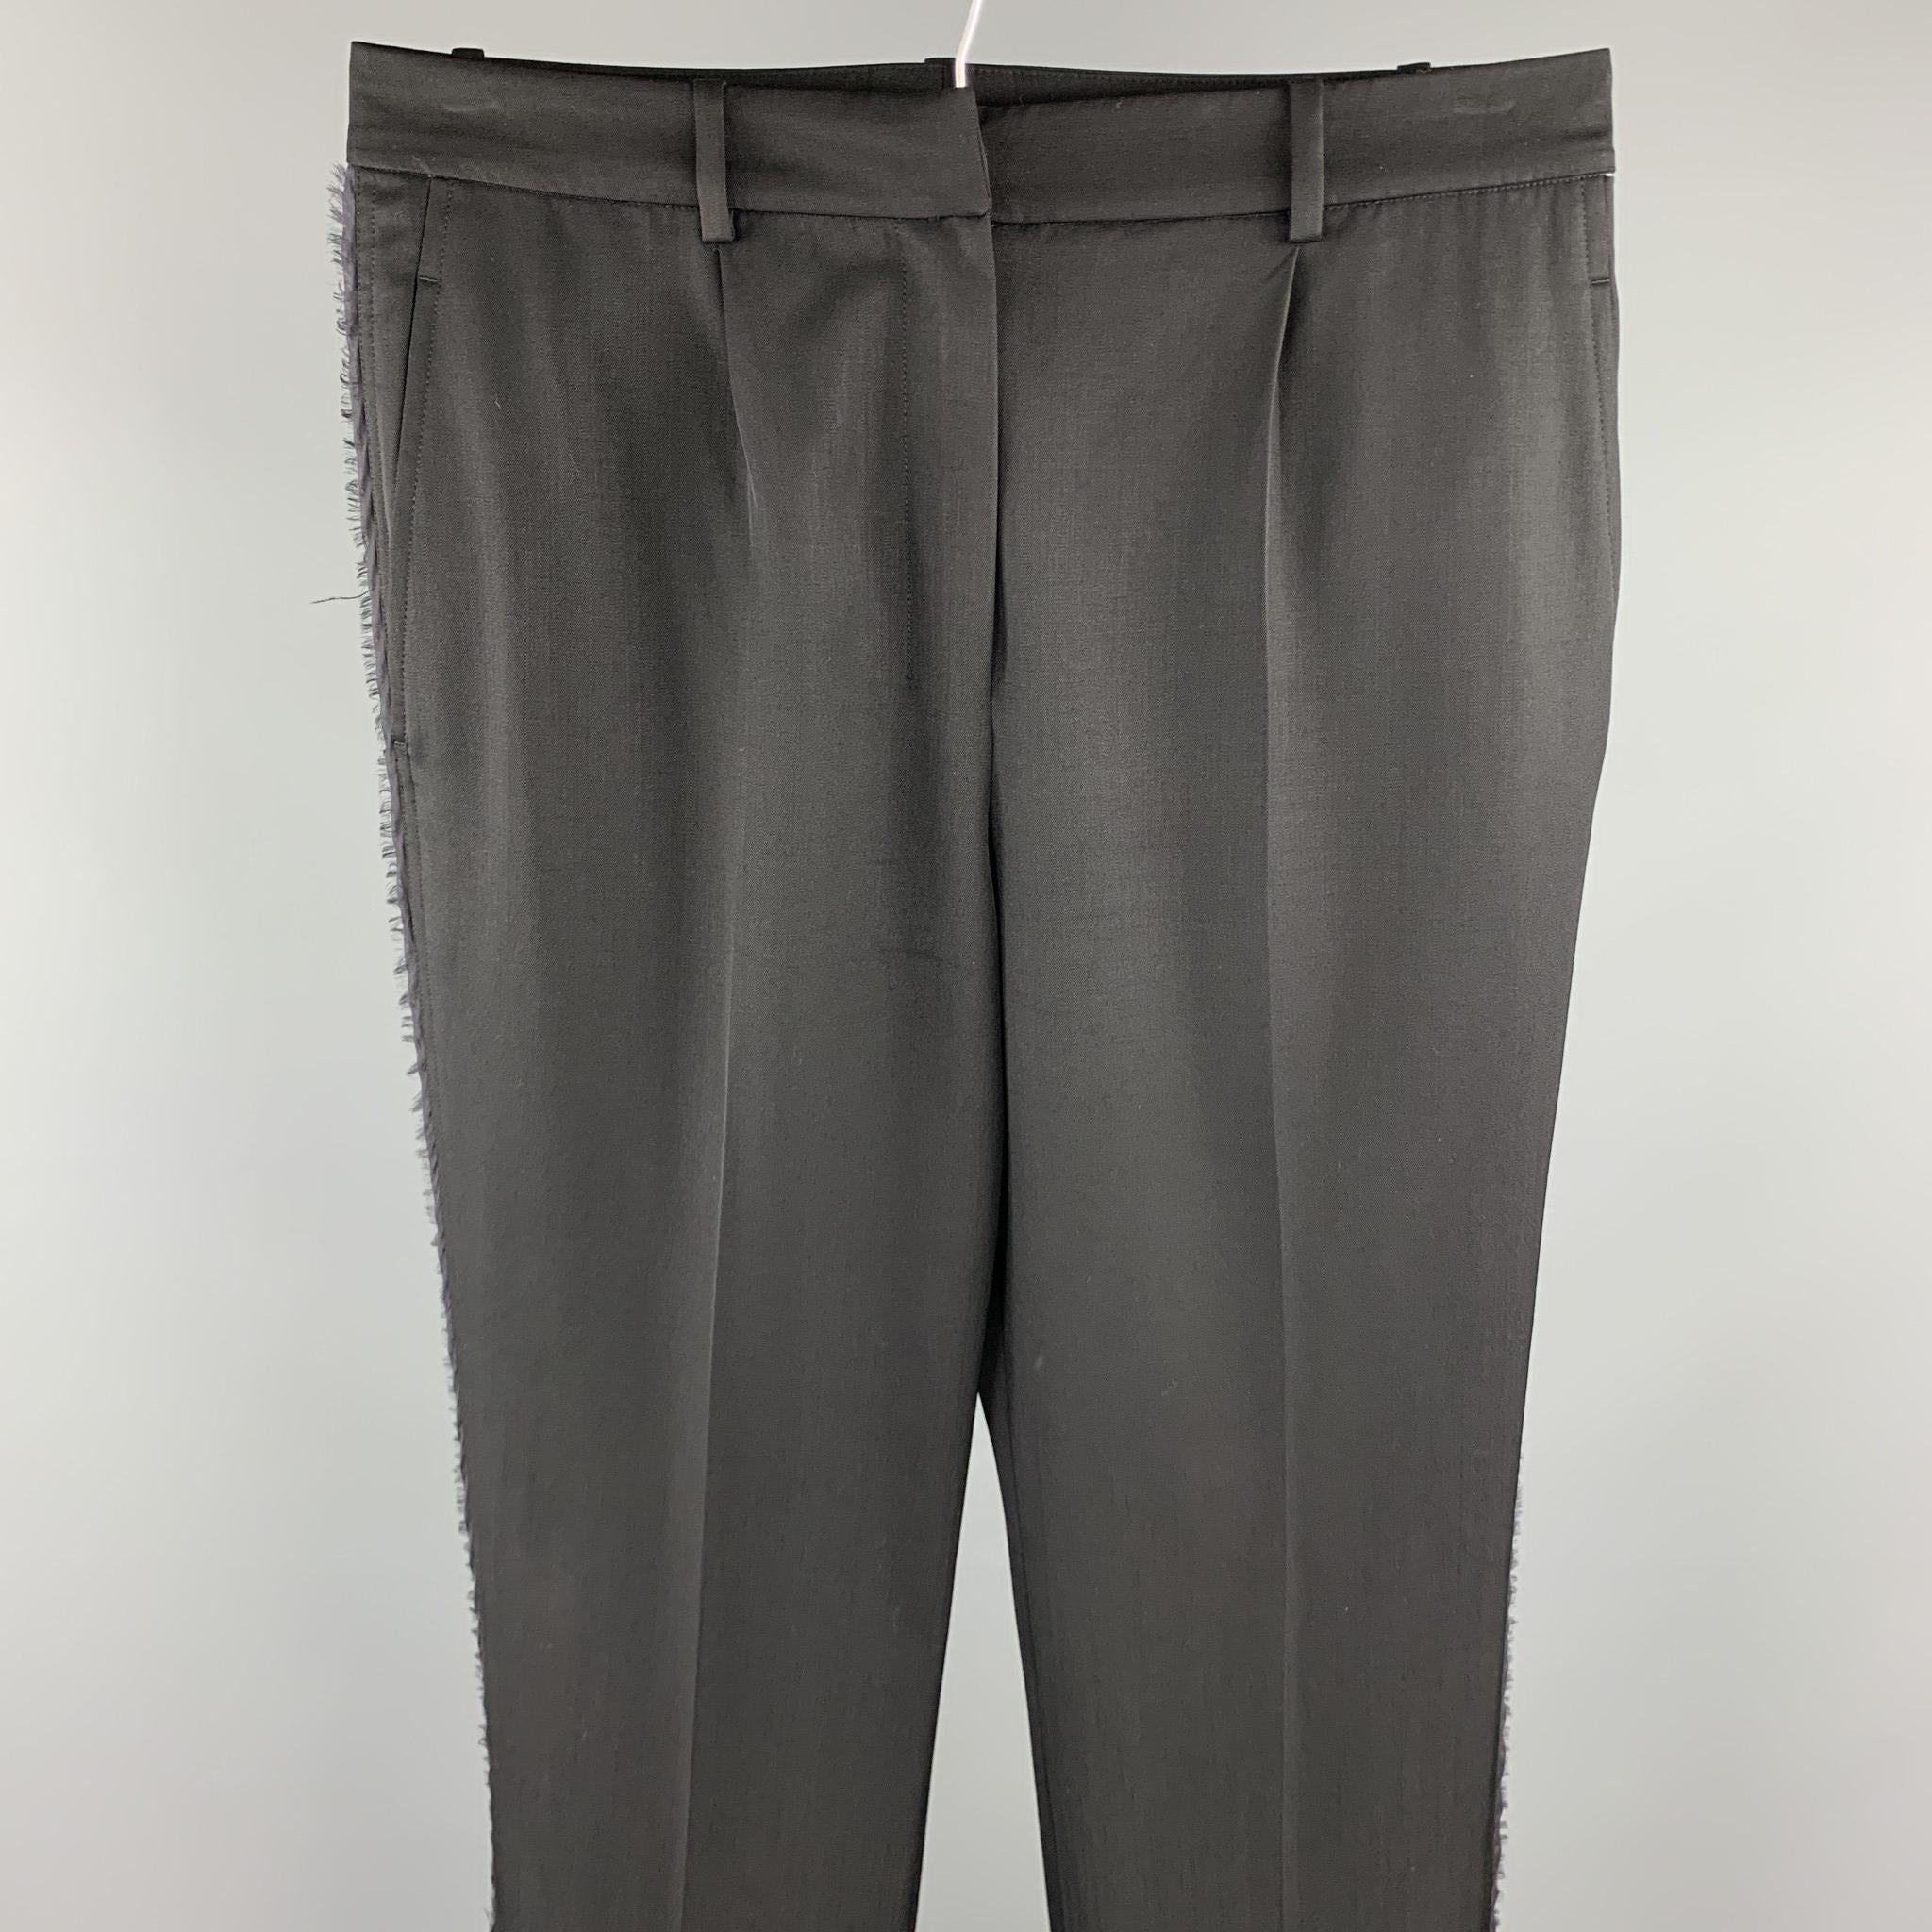 YVES SAINT LAURENT Rive Gauche dress pants comes in a black wool featuring a pleated style, raw edges, and a zip fly closure. Made in France.

Very Good Pre-Owned Condition.
Marked: F 38
Original Retail Price: $990.00

Measurements:

Waist: 30 in.